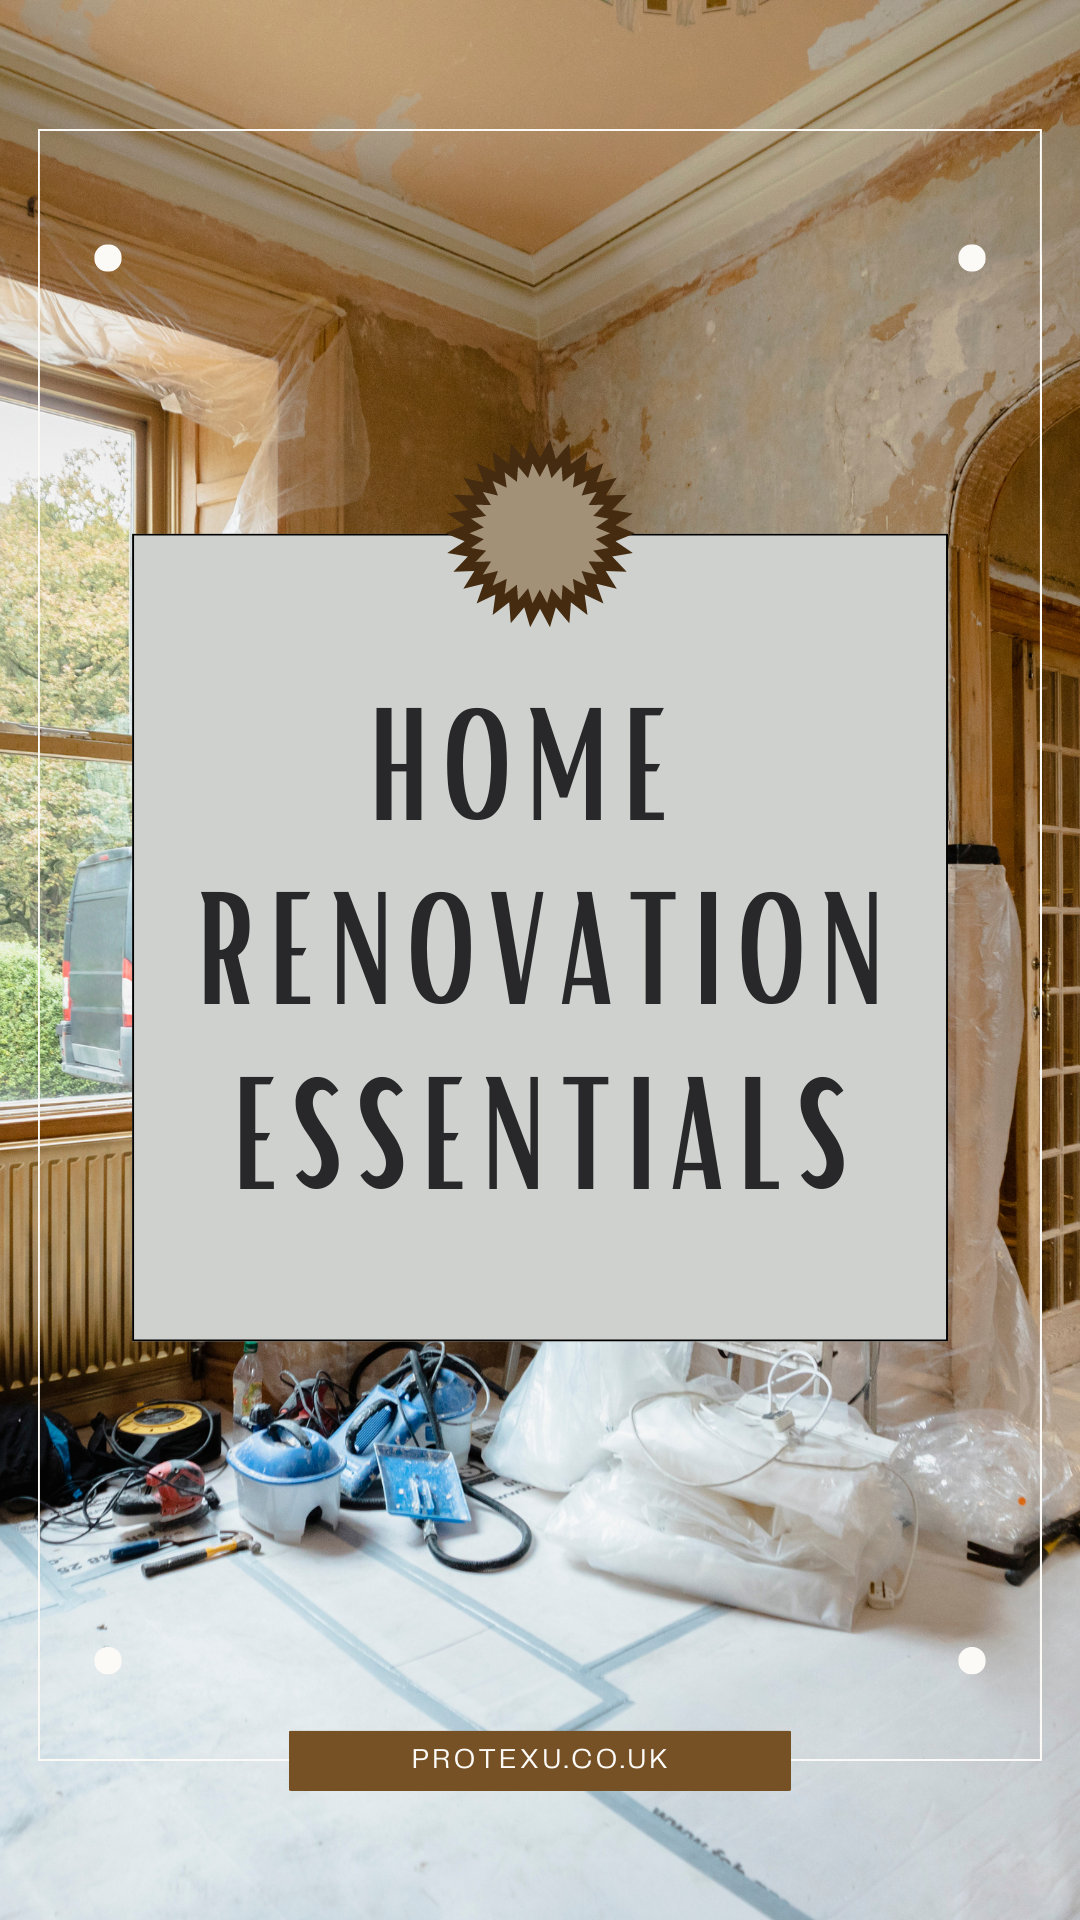 Home Renovation Essentials Blog Post, PPE, Safetywear, protexU